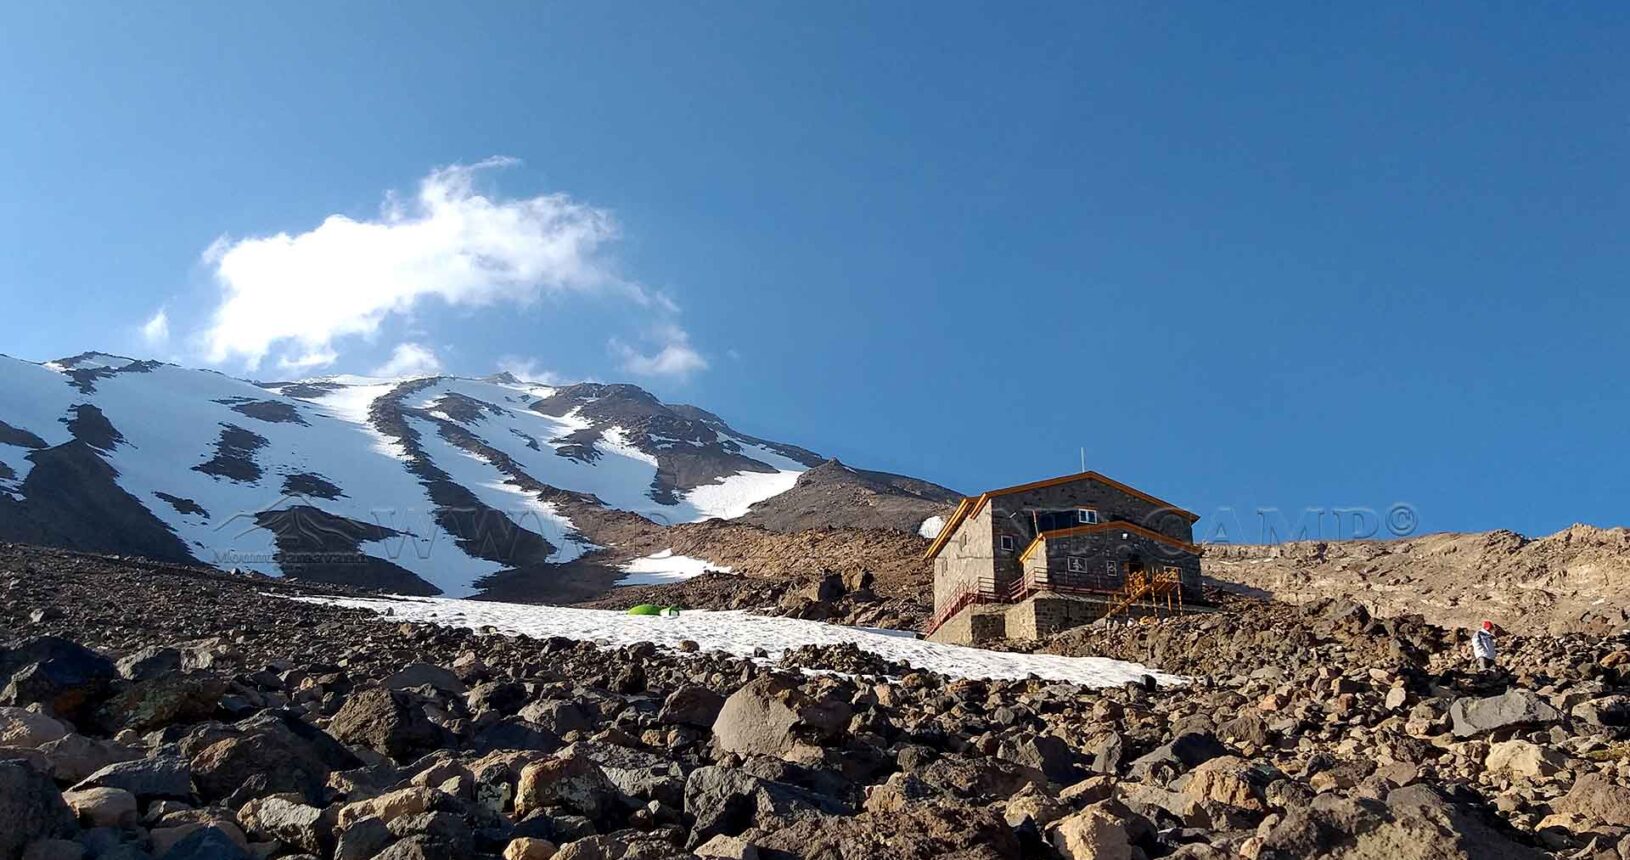 A few meters below: The new hut at Camp 3 of Mount Damavand.